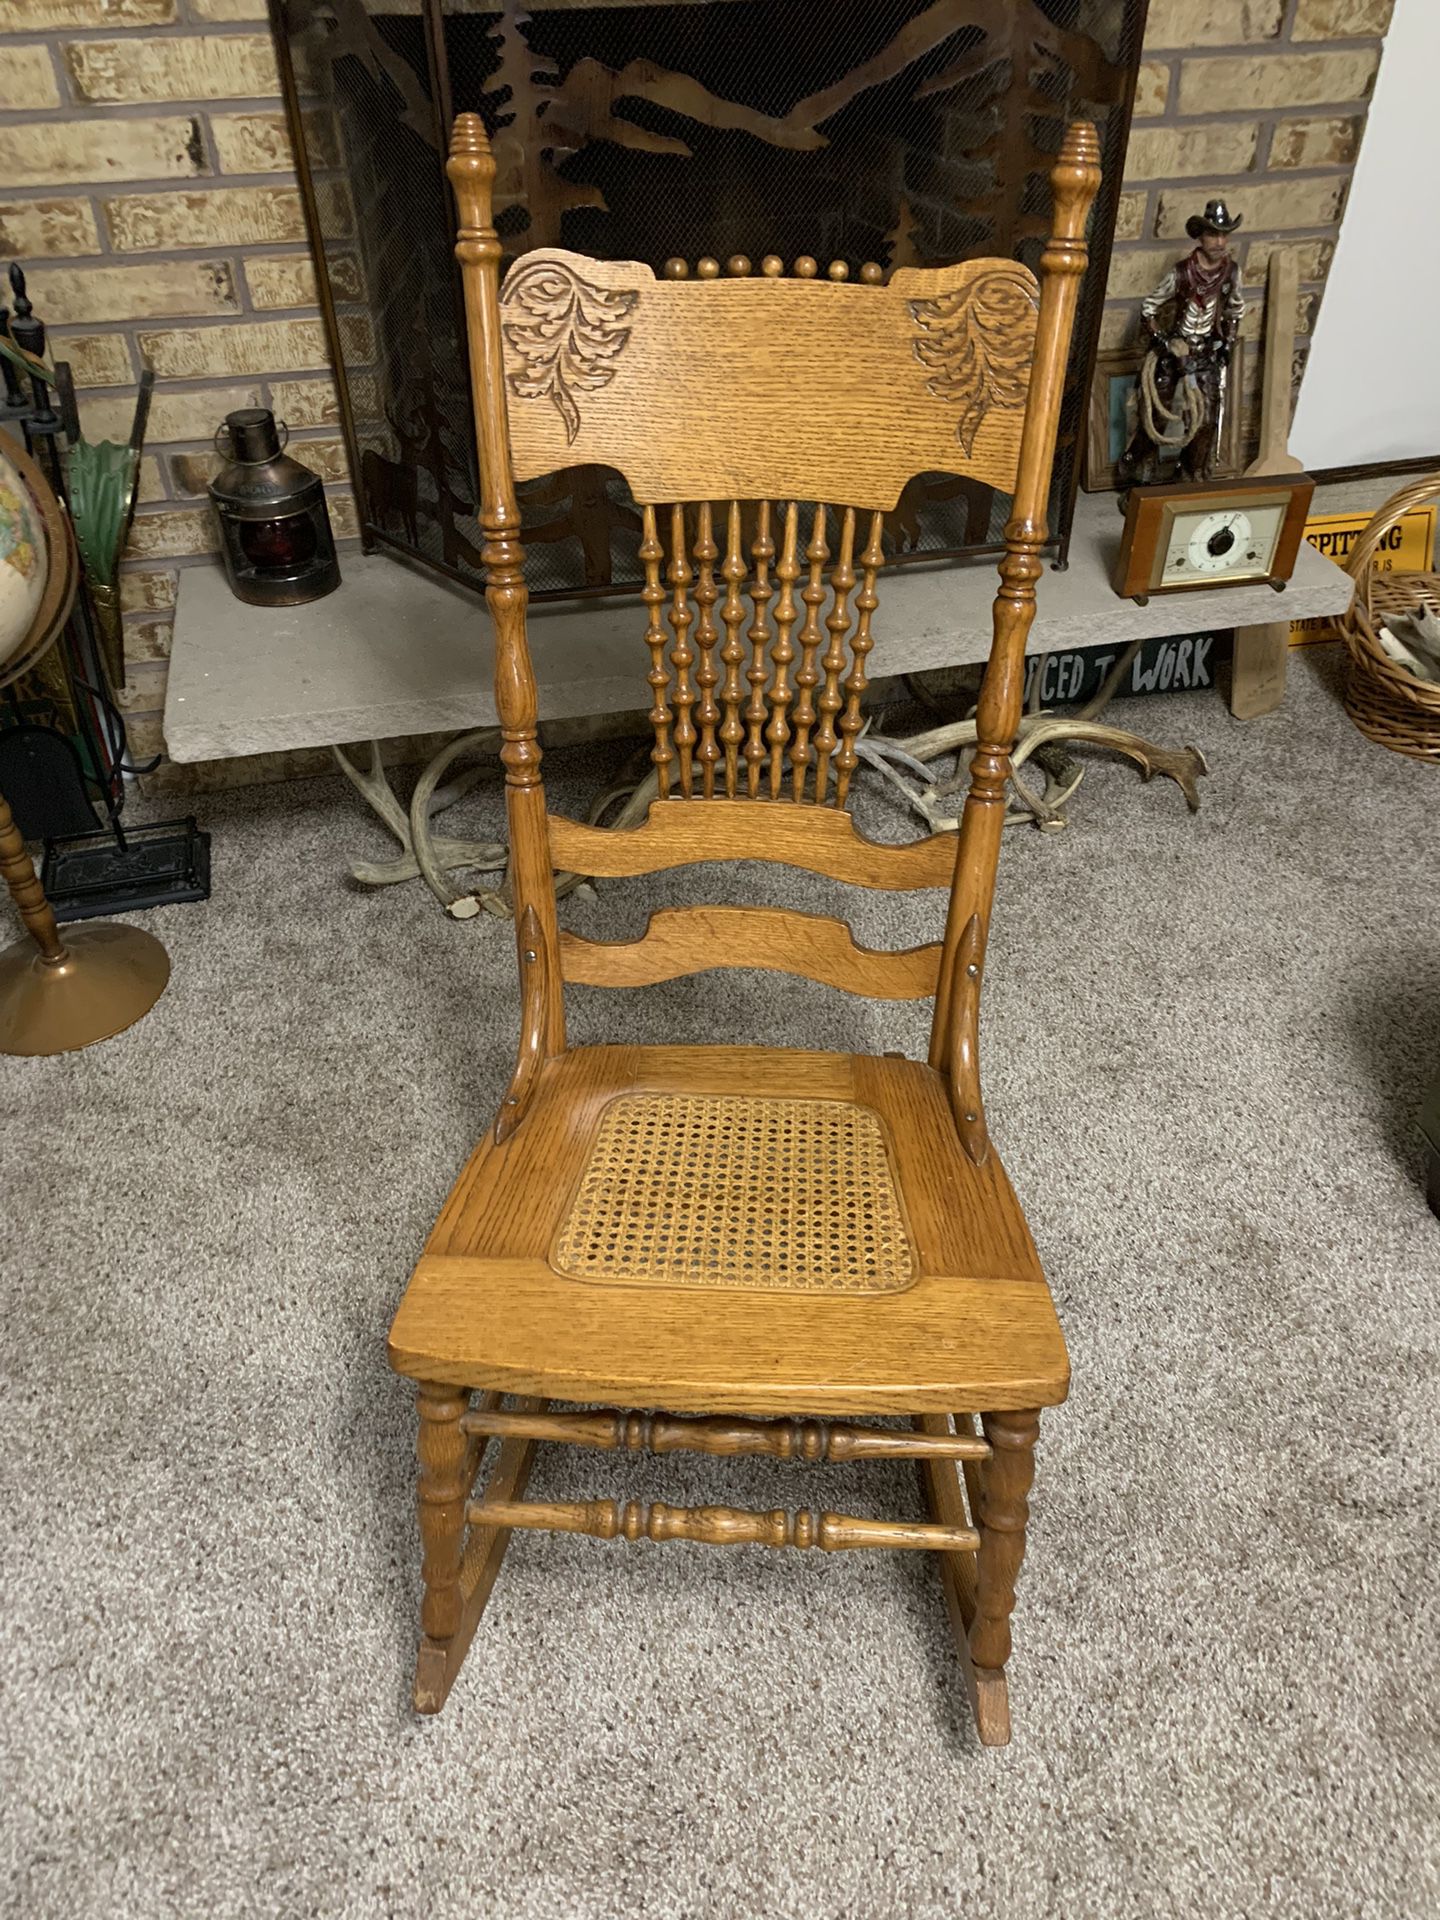 Cute Light Weight Adult Very Sturdy Solid Wood Rocking Chair